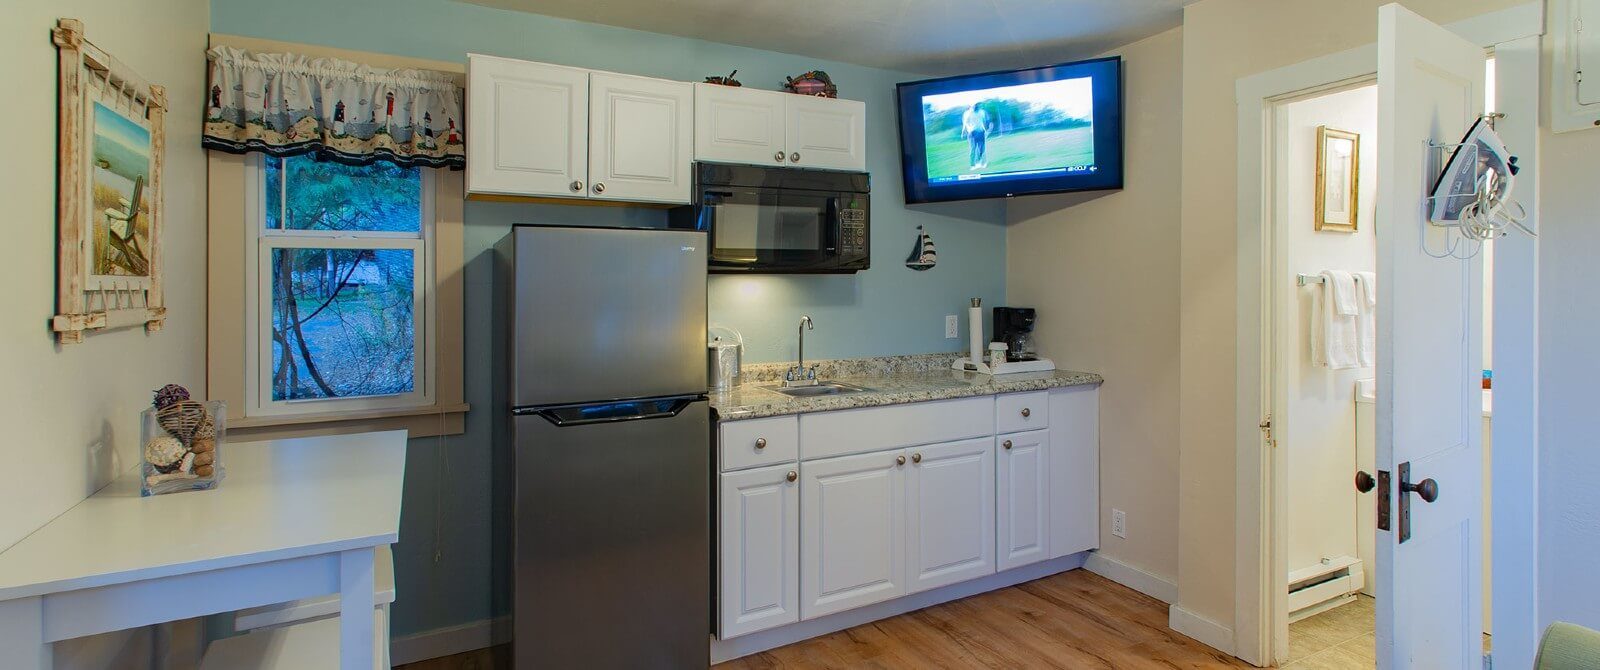 Interior cottage kitchen with white cabinets, fridge, corner mounted TV and doorway into a bathroom